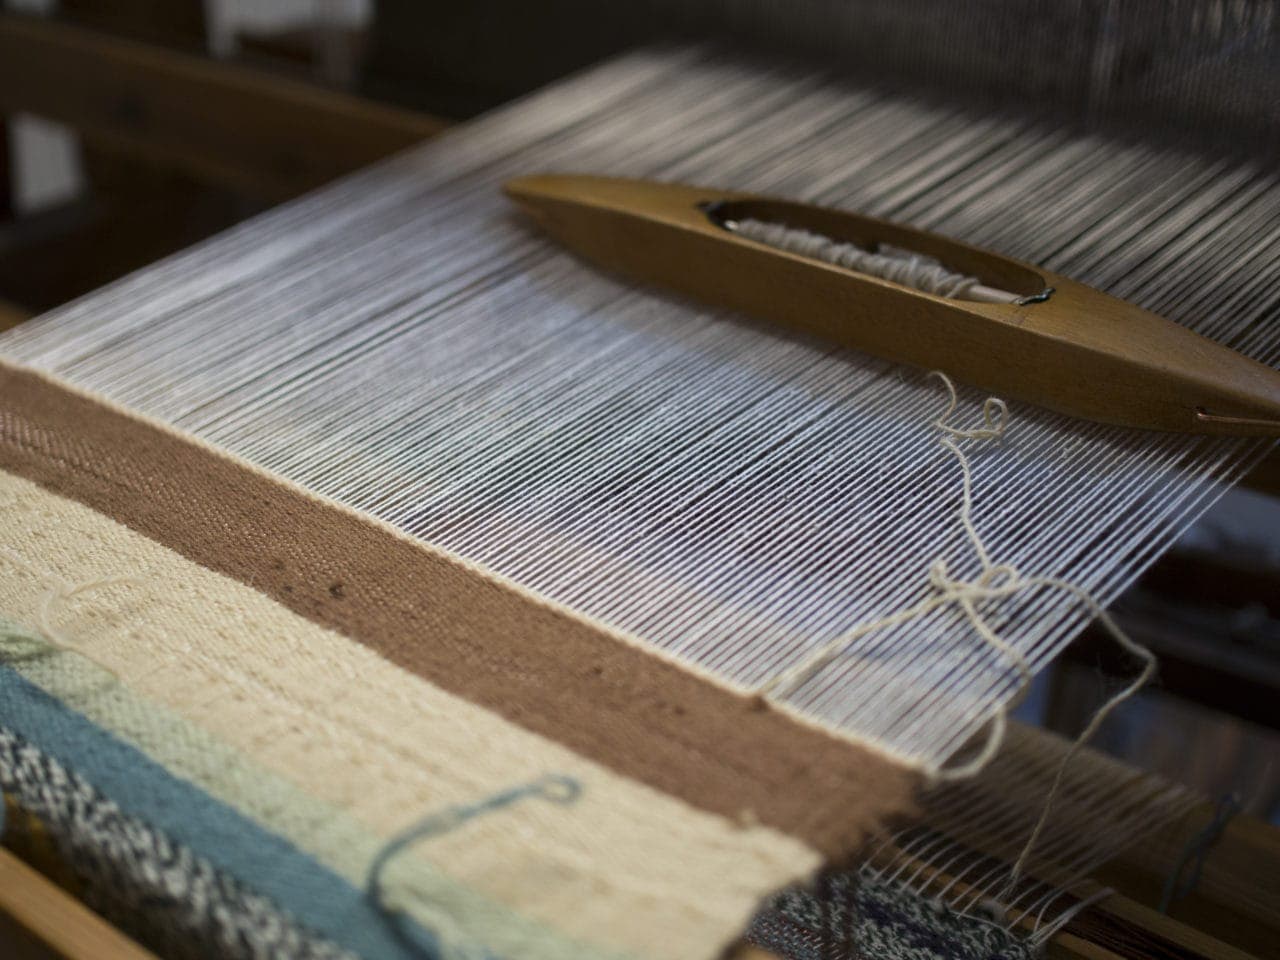 Traditional loom weaving at the Icelandic Textile Museum.